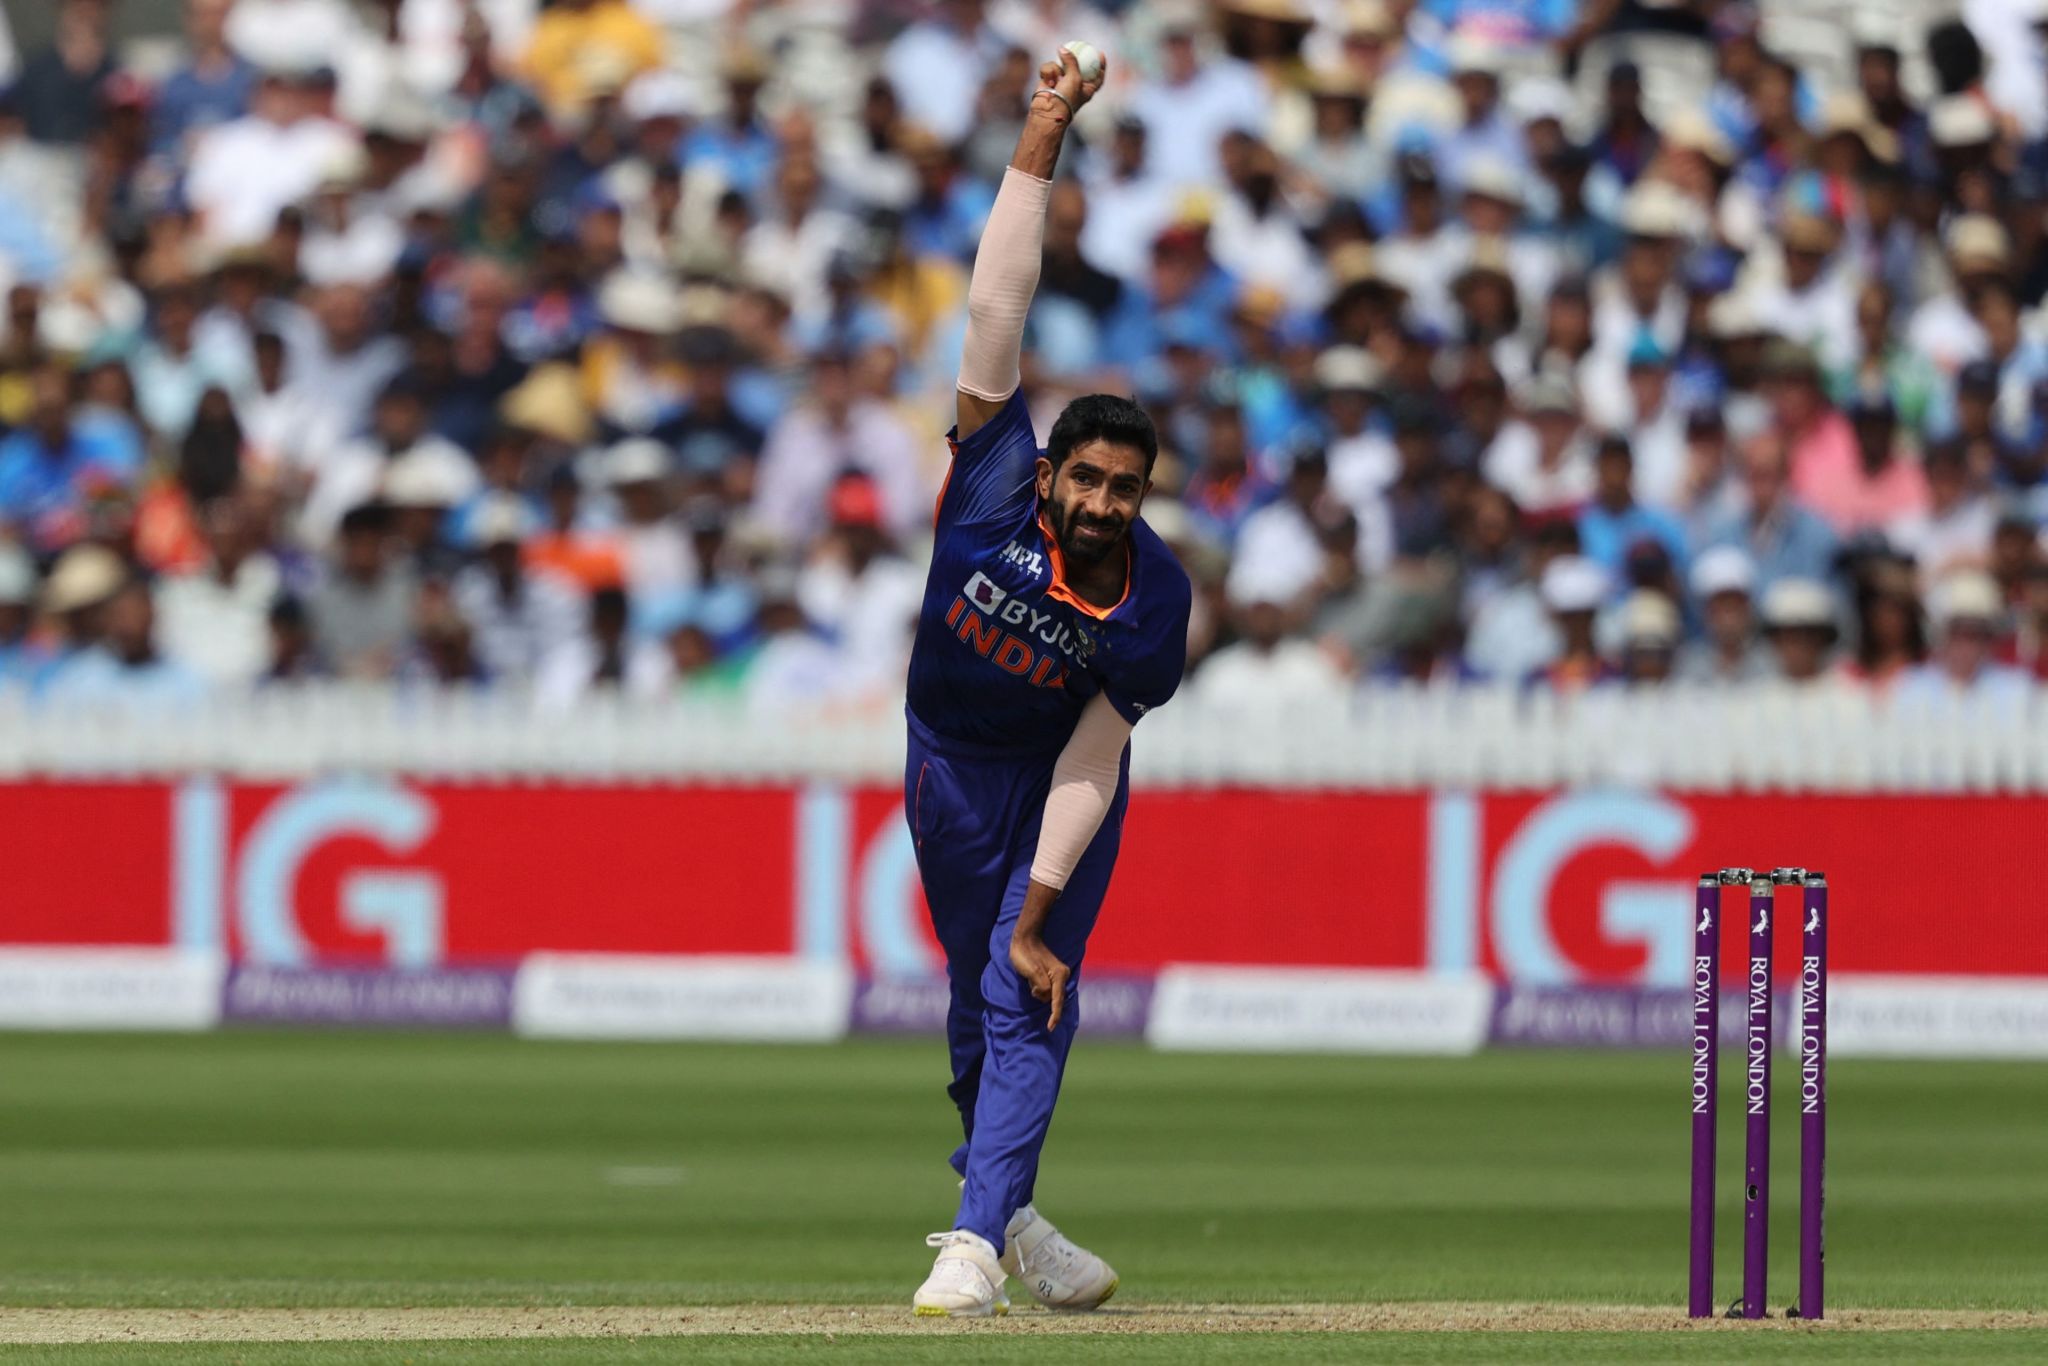 Jasprit Bumrah T20 WC: BCCI official says Jasprit Bumrah 'Recovering Well', likely to be available for T20 World Cup, Asia Cup 2022, Jasprit Bumrah Injury